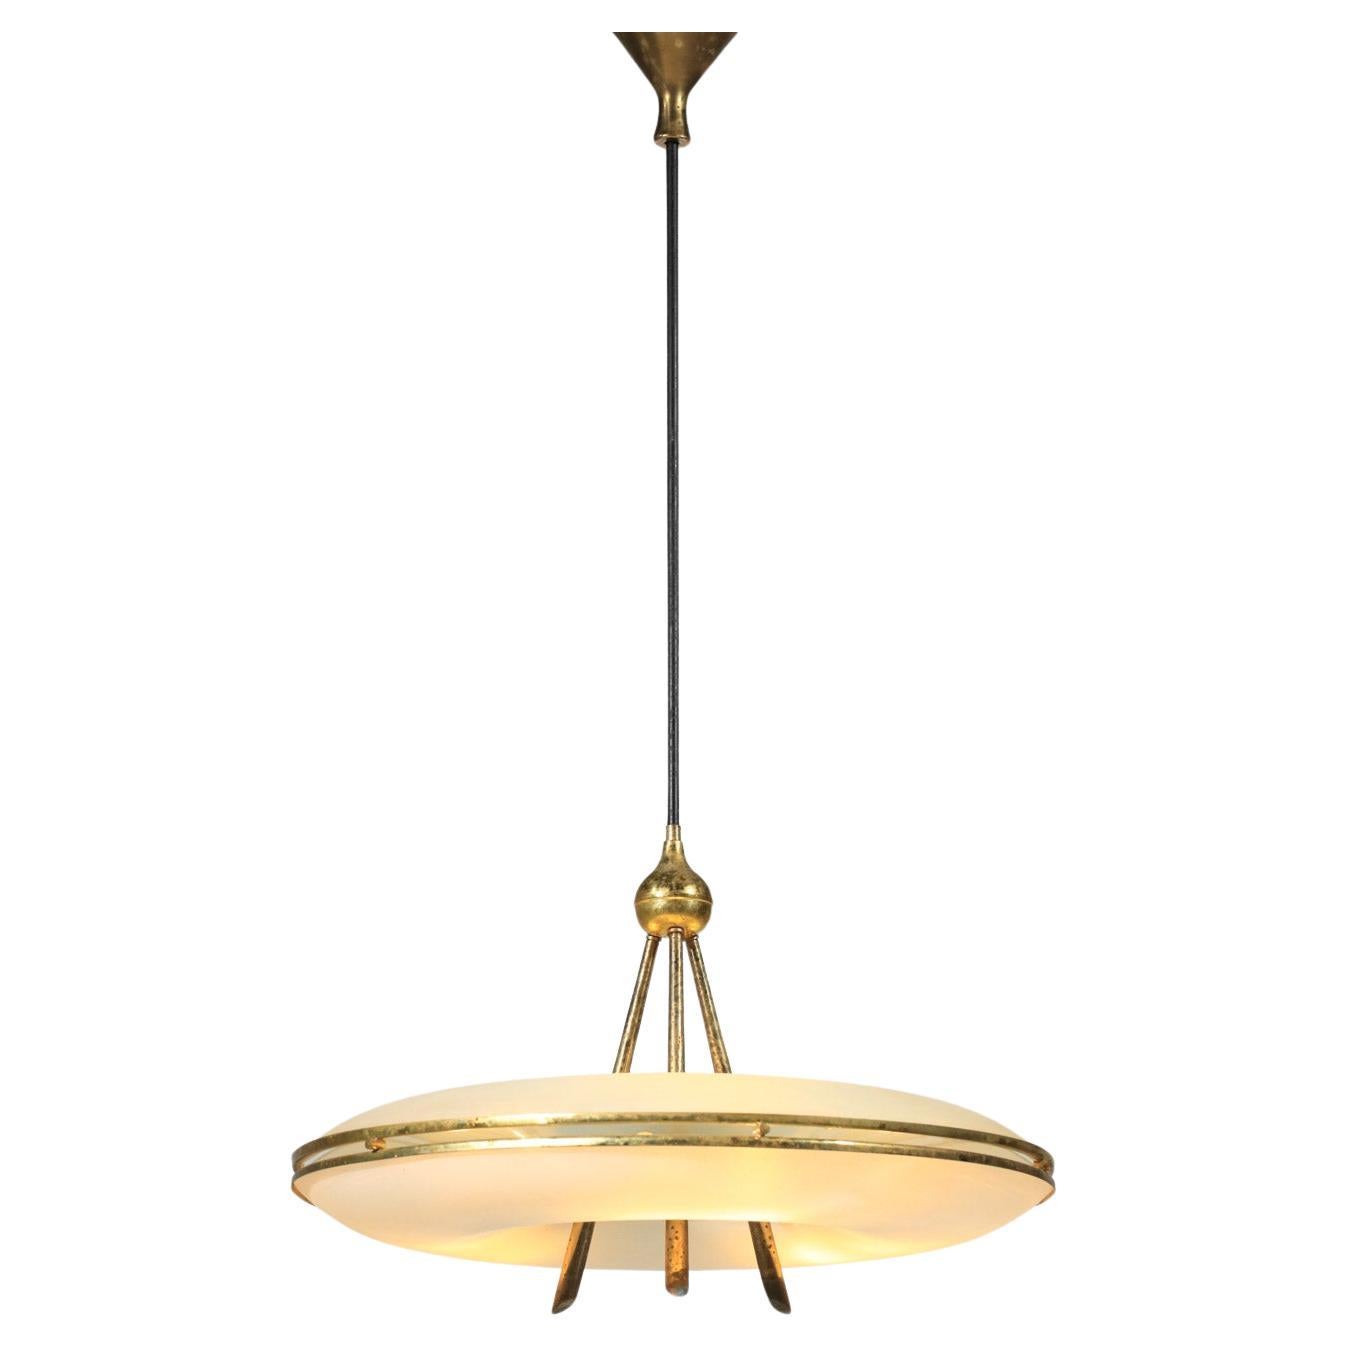 Italian pendant light from the 50s in the style of the work of Pietro Chiesa or Fontana Arte of the time. Very original chandelier in the shape of a saucer or donut with two cups in white opaline. The structure and the attachment system are entirely